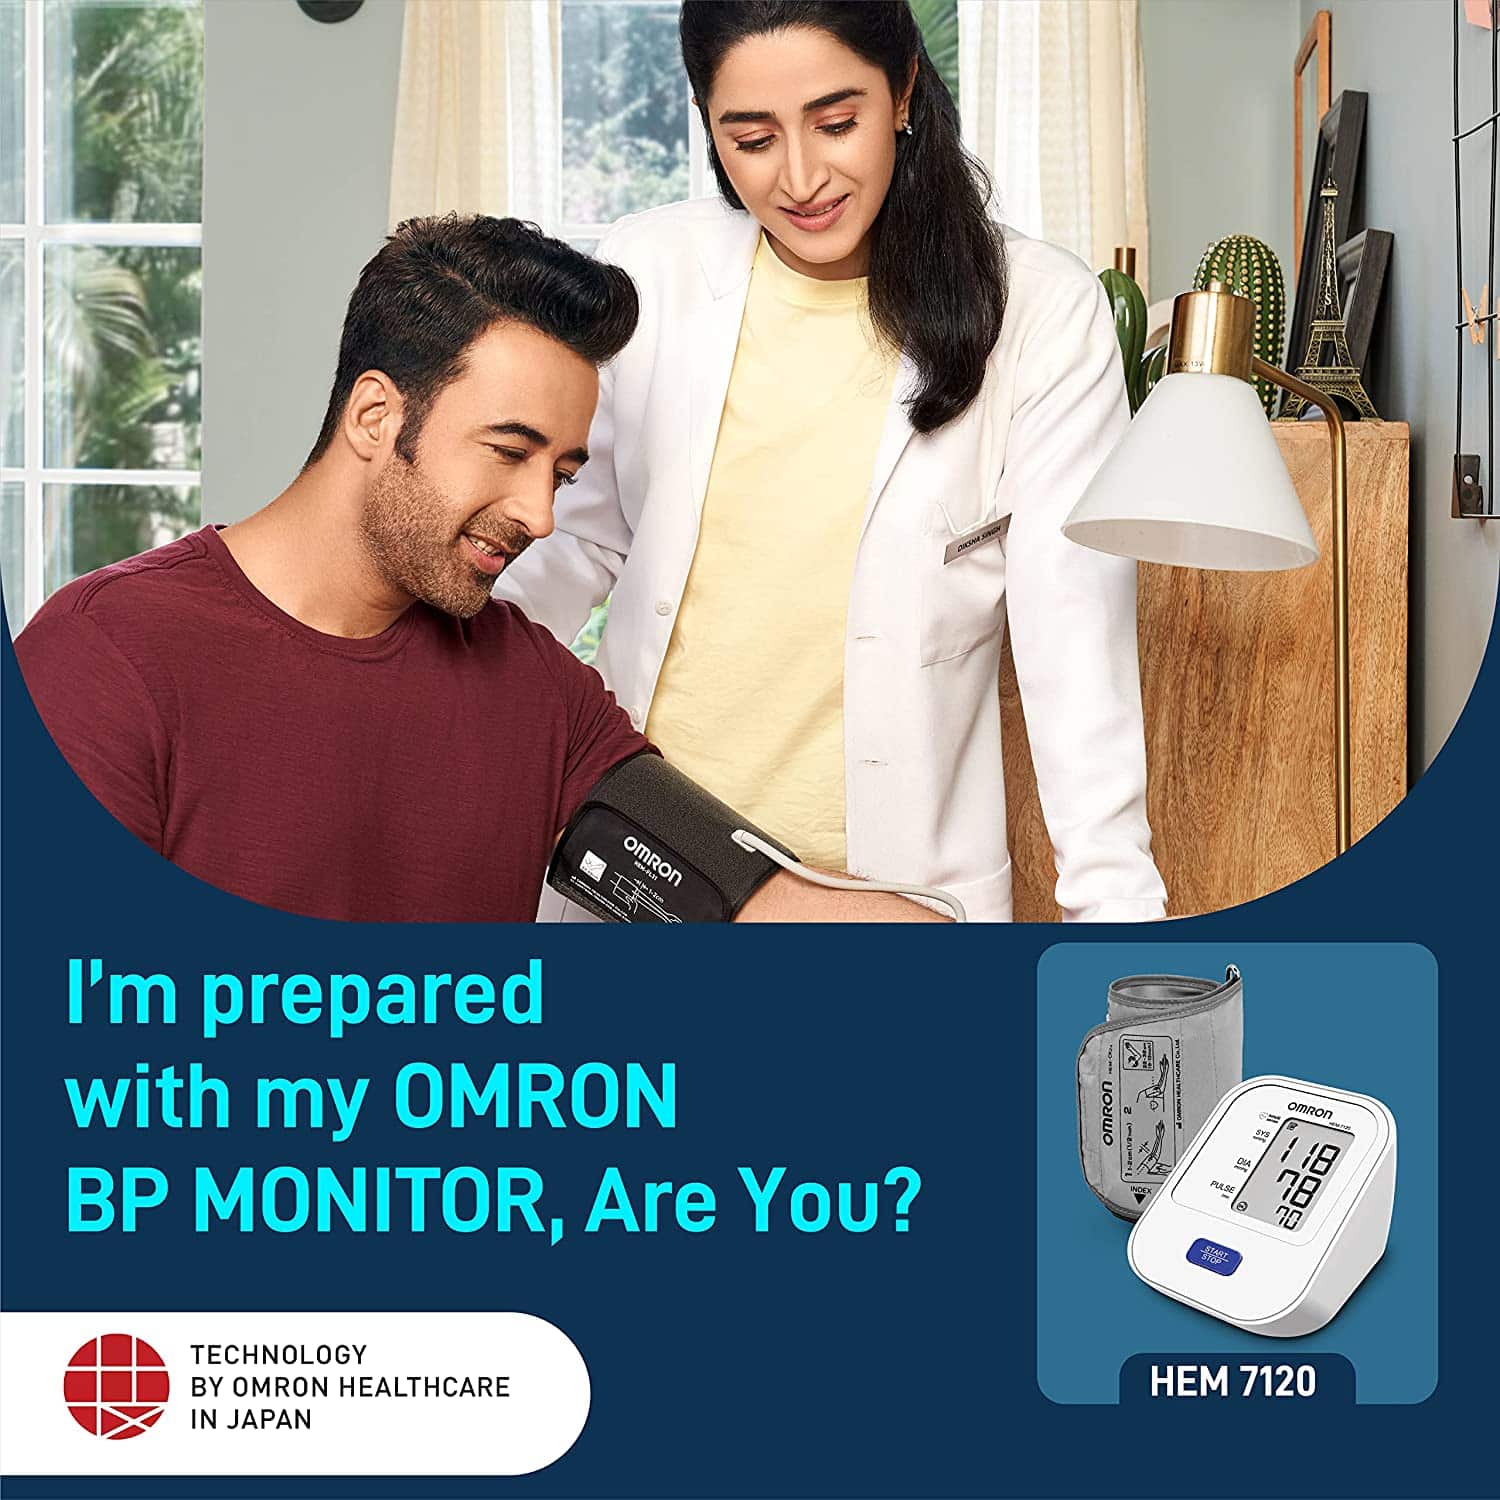 Omron-HEM-7120-Fully-Automatic-Digital-Blood-Pressure-Monitor-With-Intellisense-Technology-For-Most-Accurate-Measurement-Arm-Circumference4.jpg